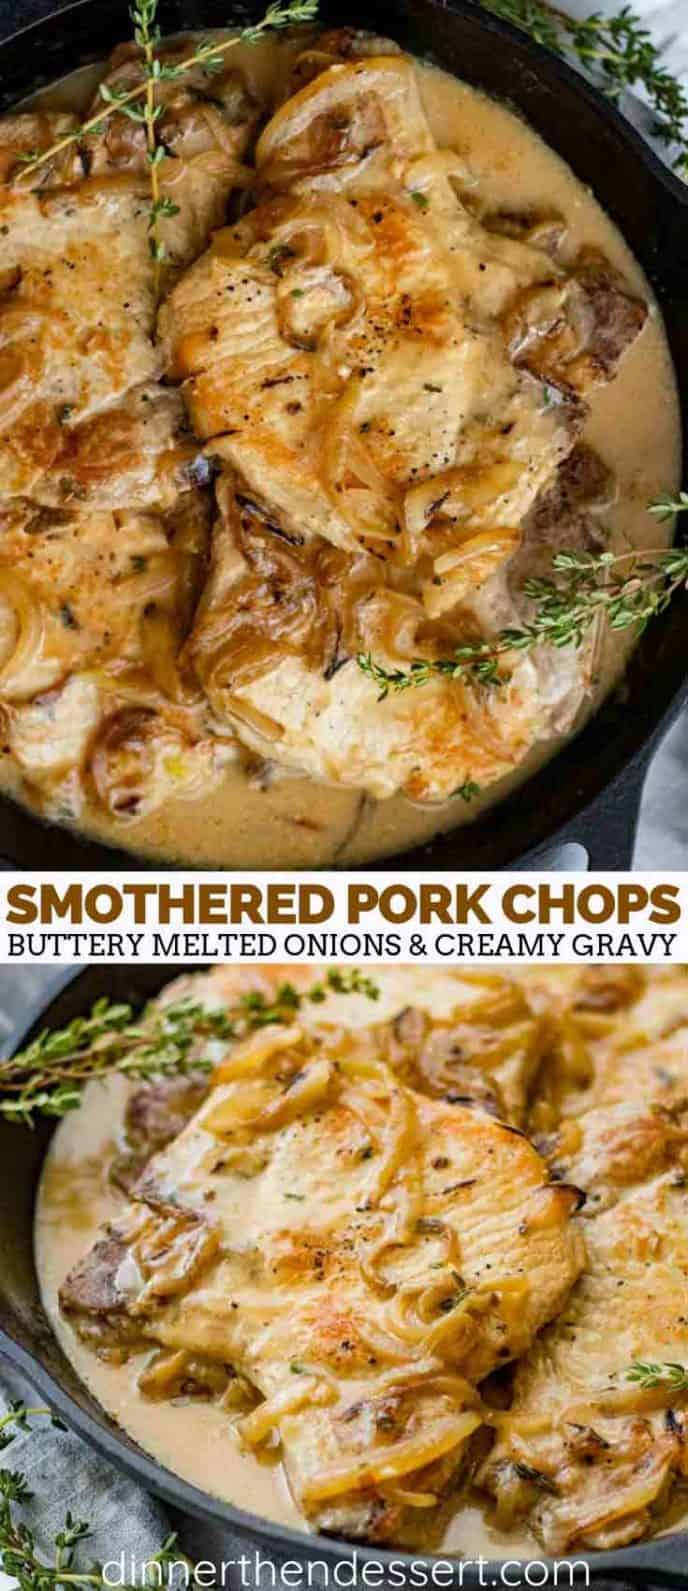 Pork Chops Smothered with Onions and Cream Gravy